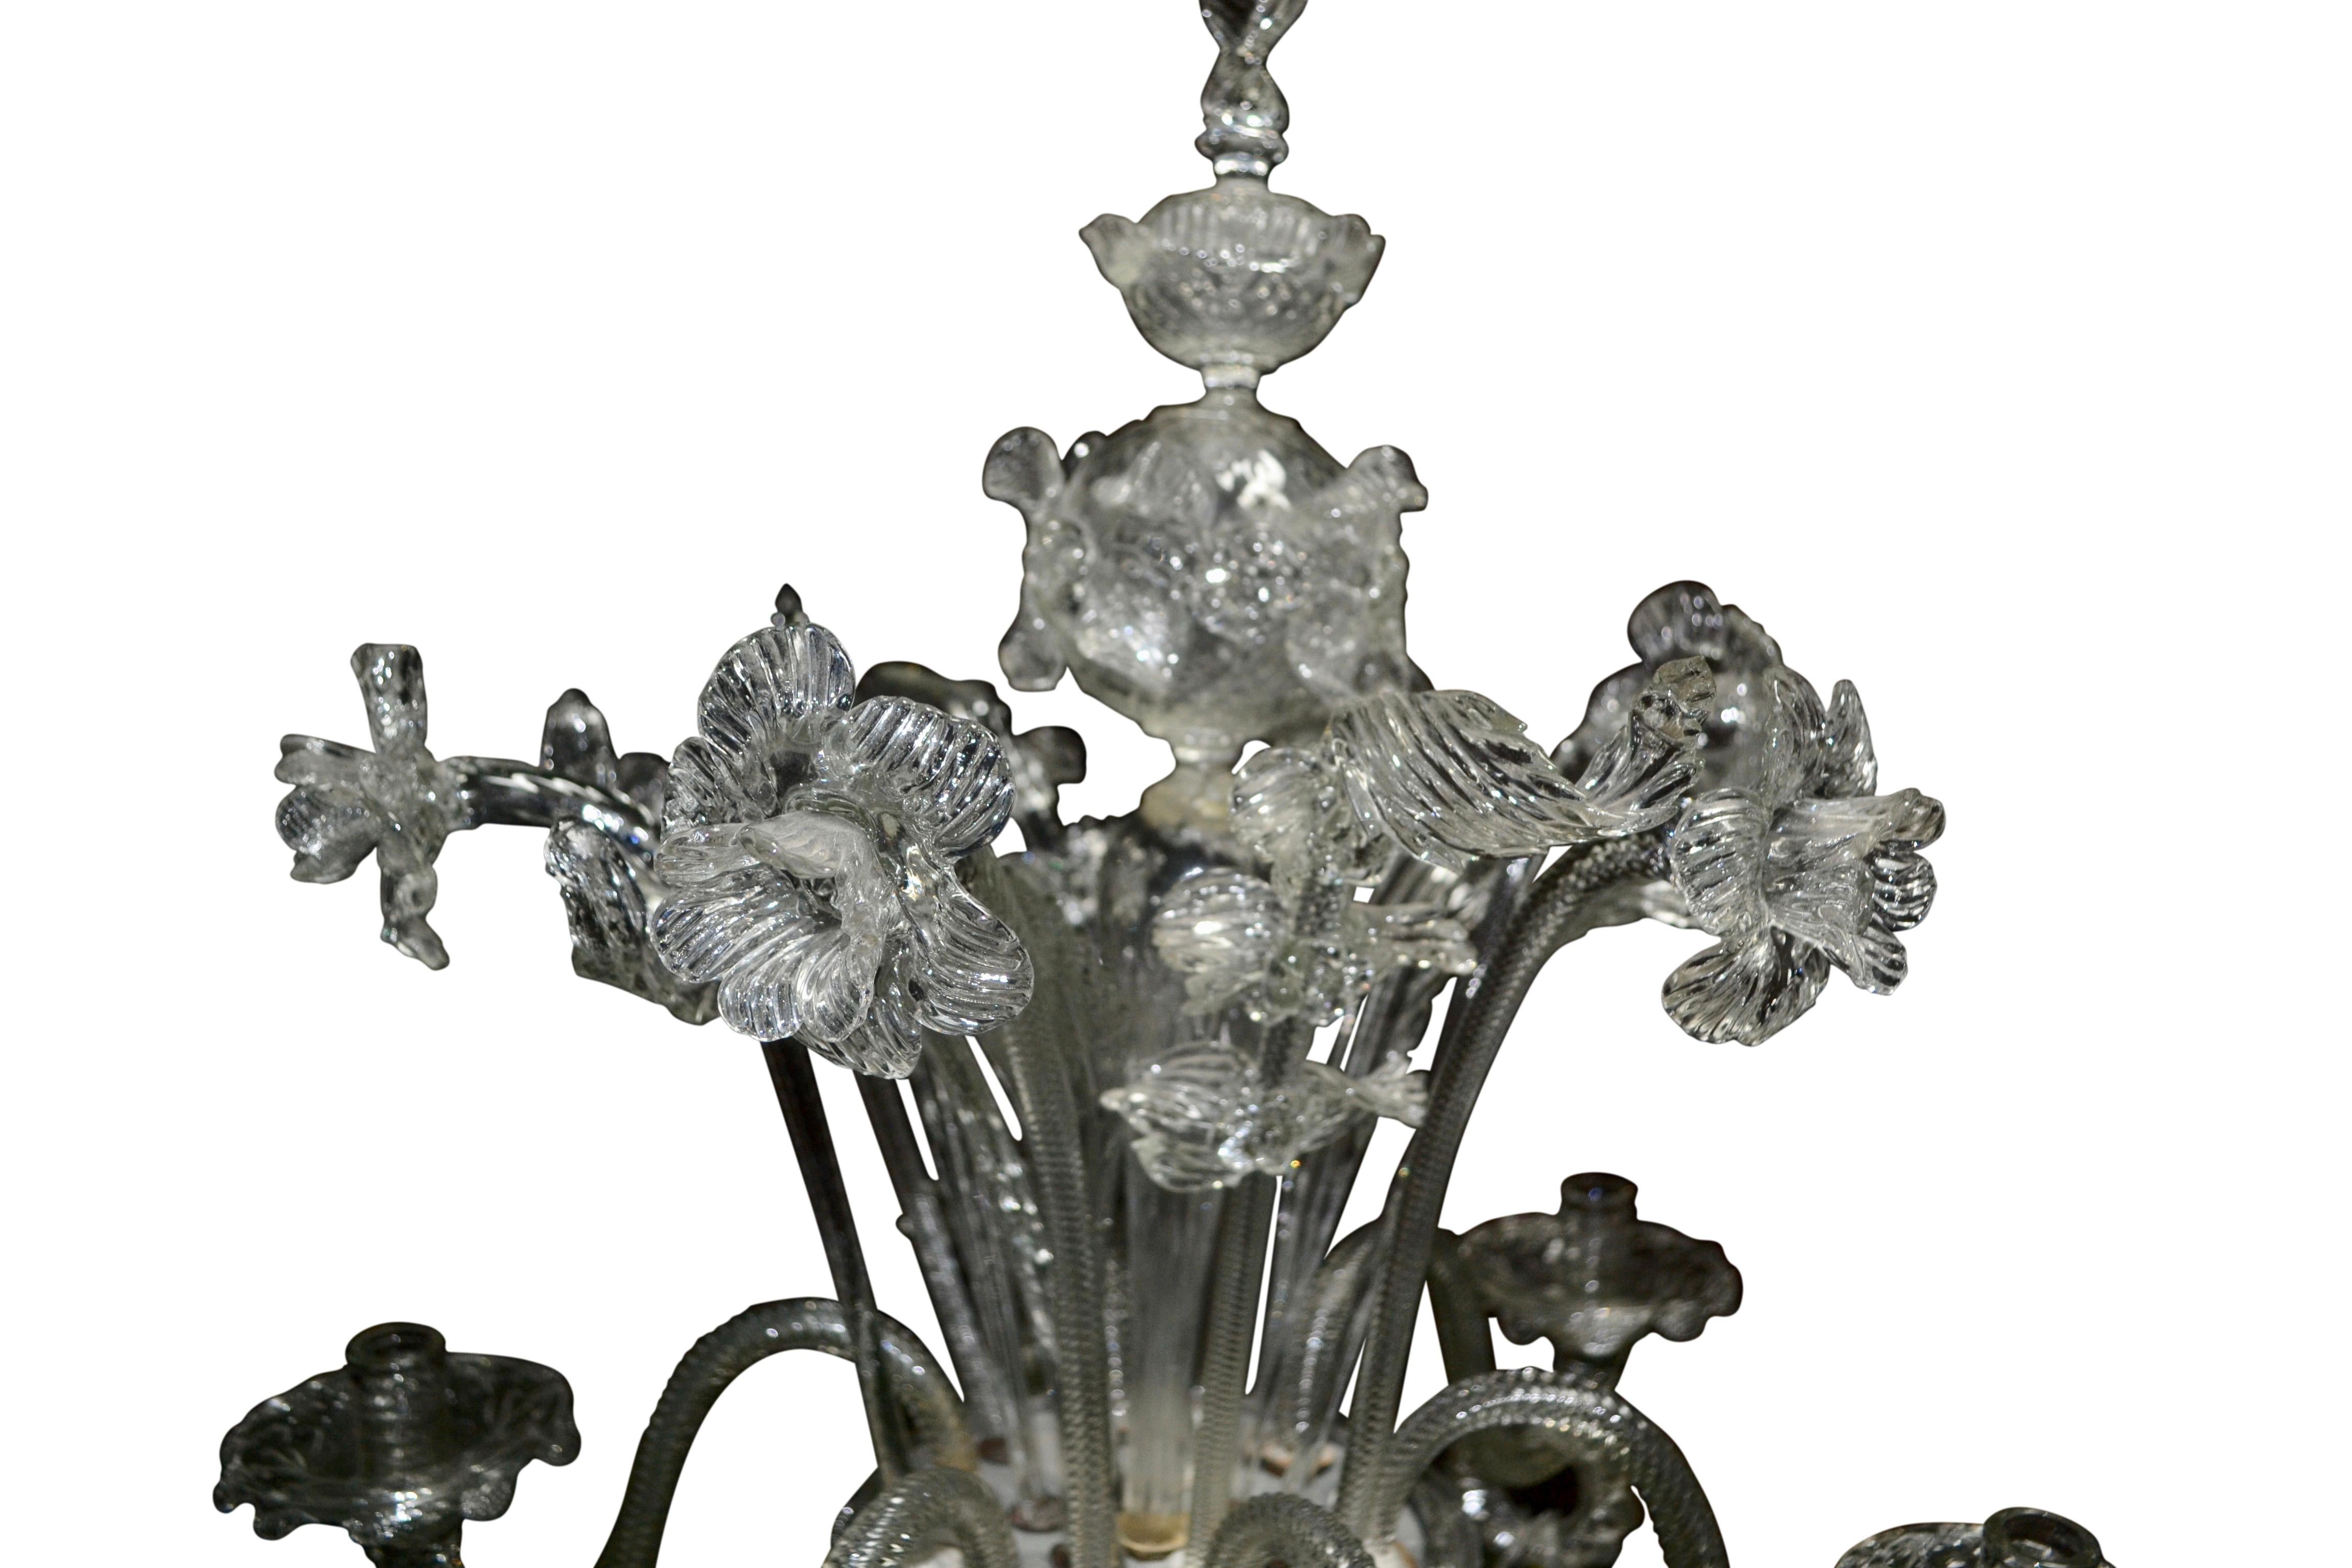 A clear glass single candelabra made in the Murano factory in Venice, circa 1930. The elaborately decorated column on a circular base supports a mid level bowl from which six 'S' shaped candle arms attach. Each arm is connected via a decorative